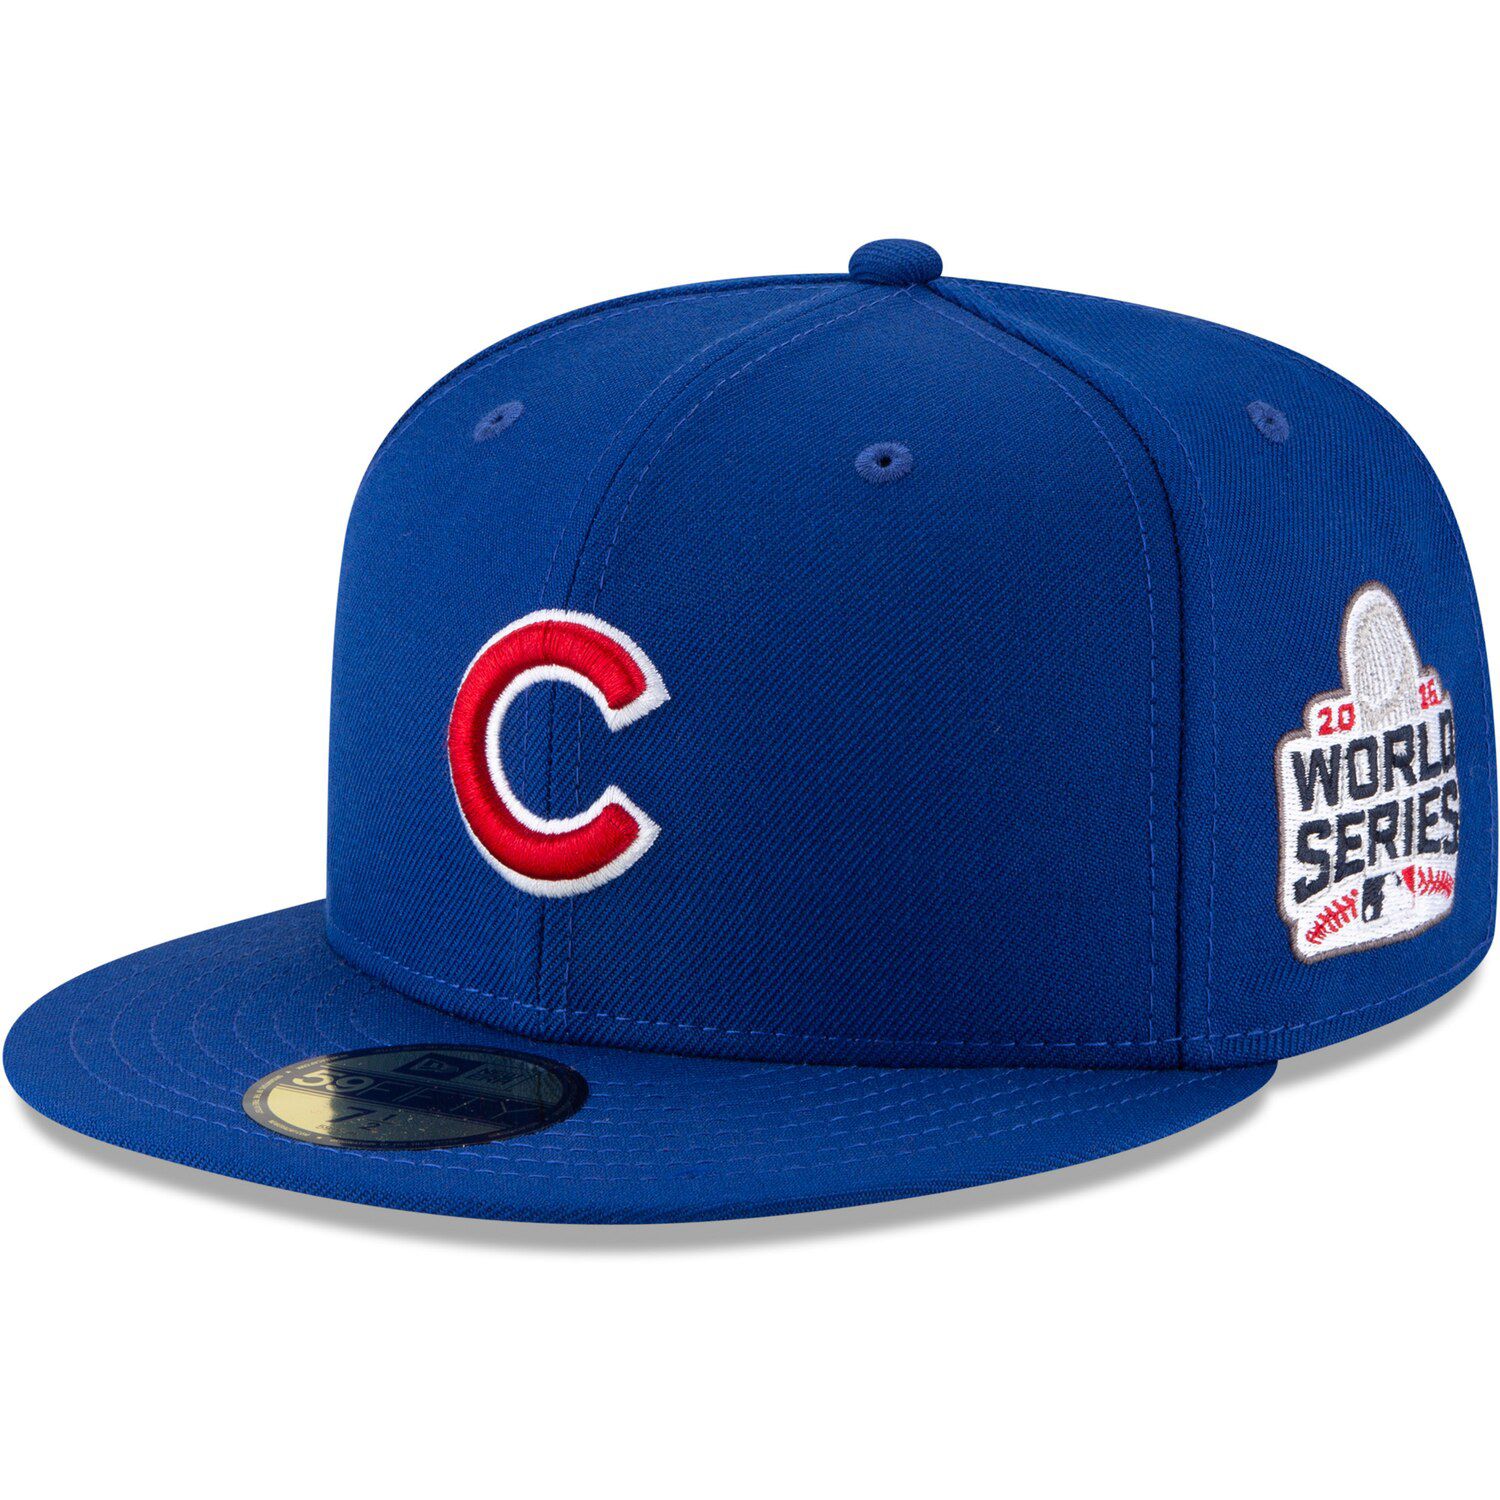 2016 World Series Wool 59FIFTY Fitted Hat